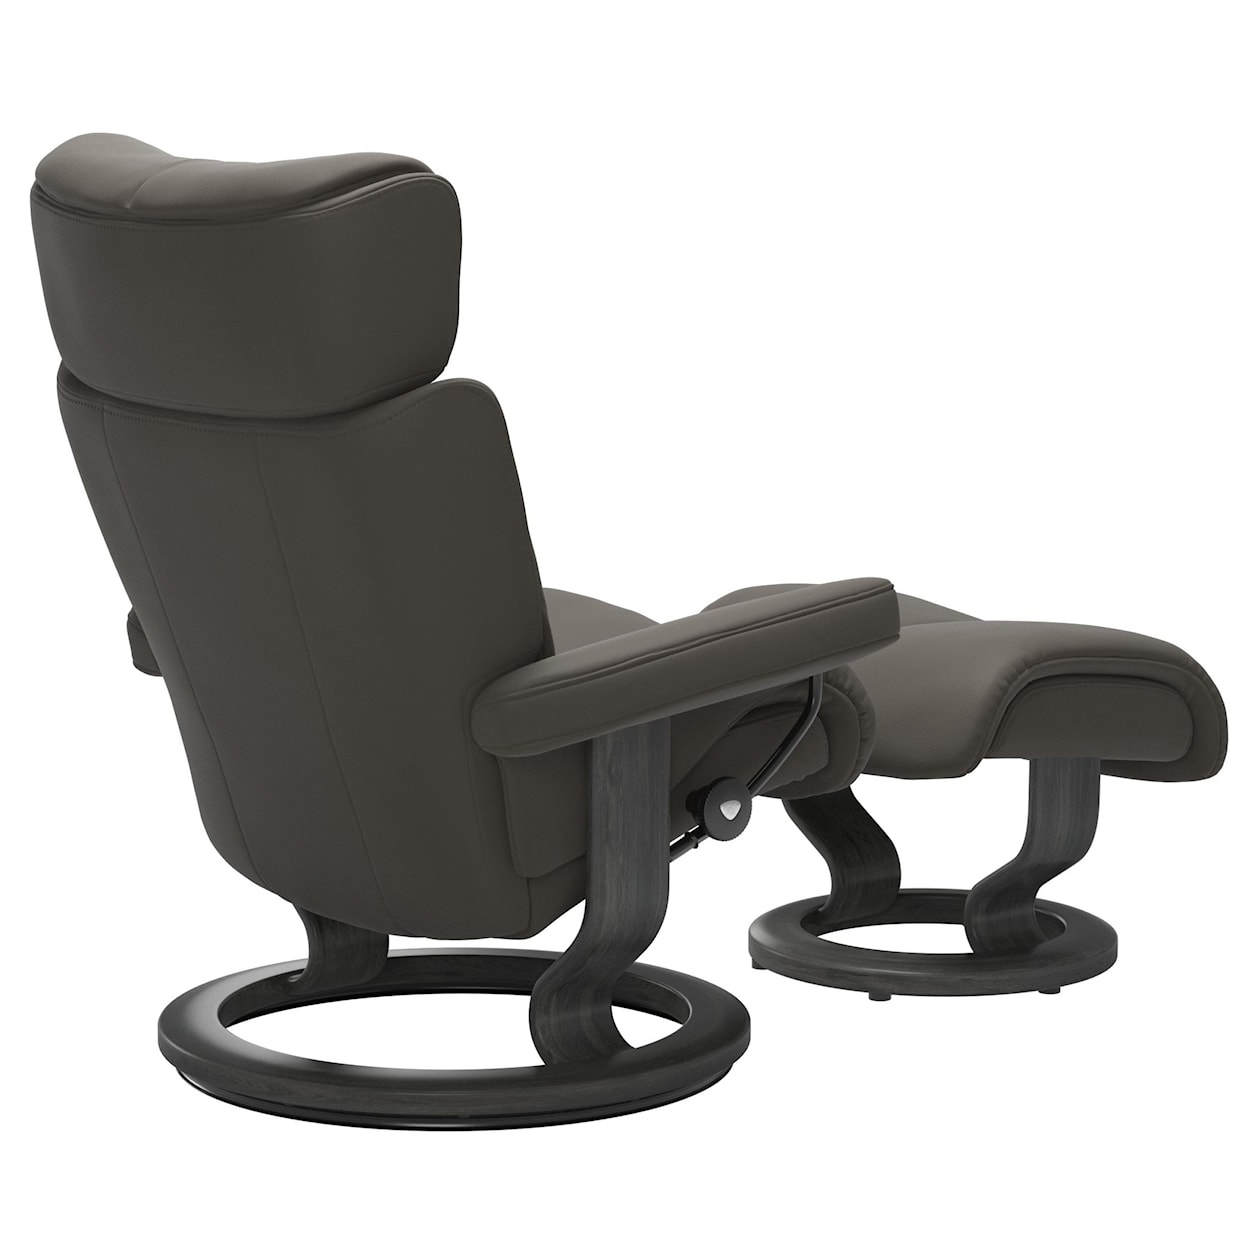 Stressless by Ekornes Magic Chair and Ottoman